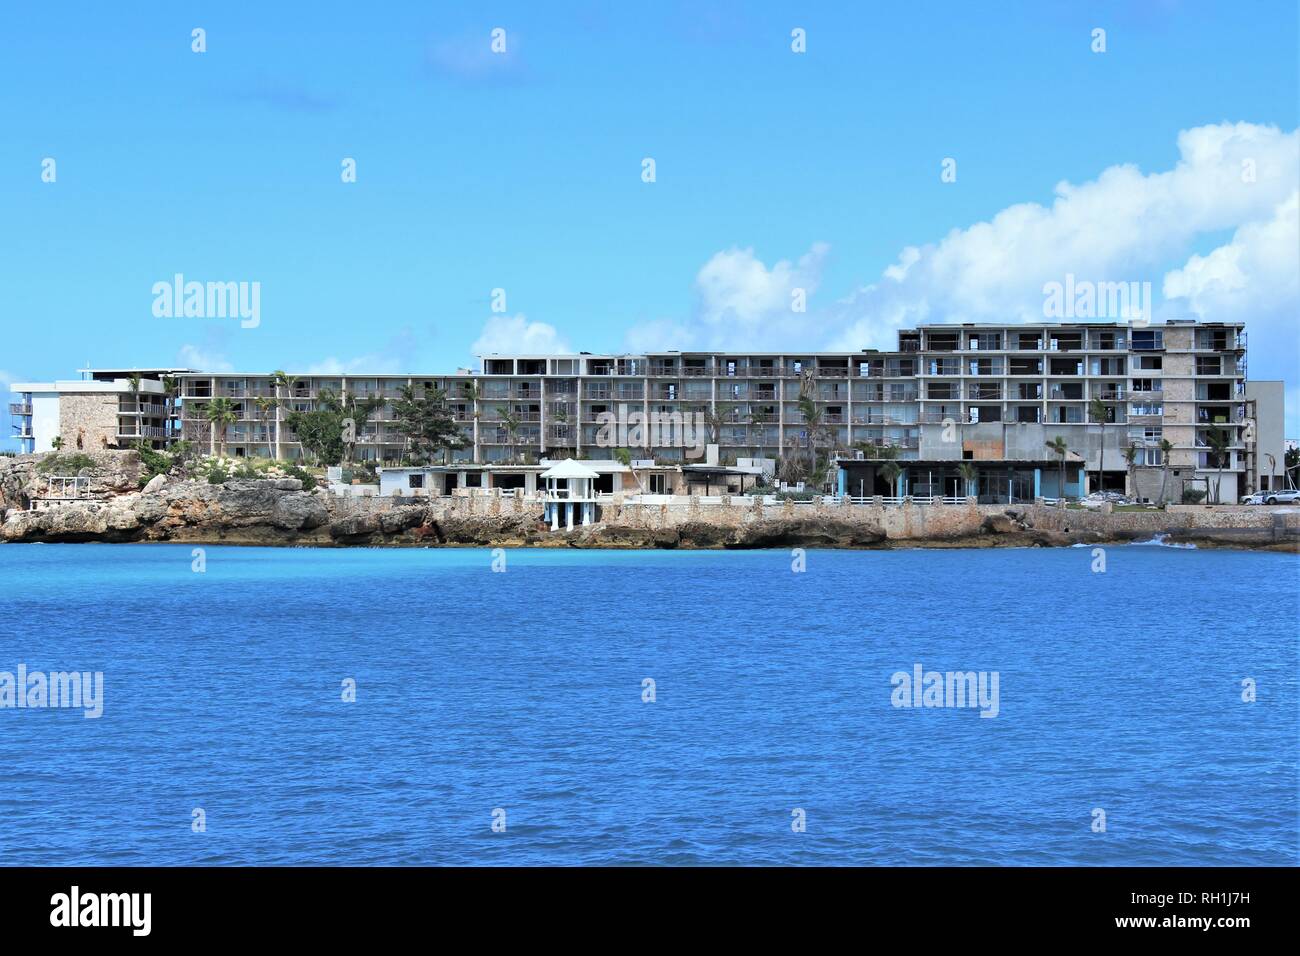 Maho Bay, Sint Maarten - February 27th 2018: The ruins of the Sonesta Beach Resort Hotel, five months on from Hurricane Irma that destroyed it. Stock Photo